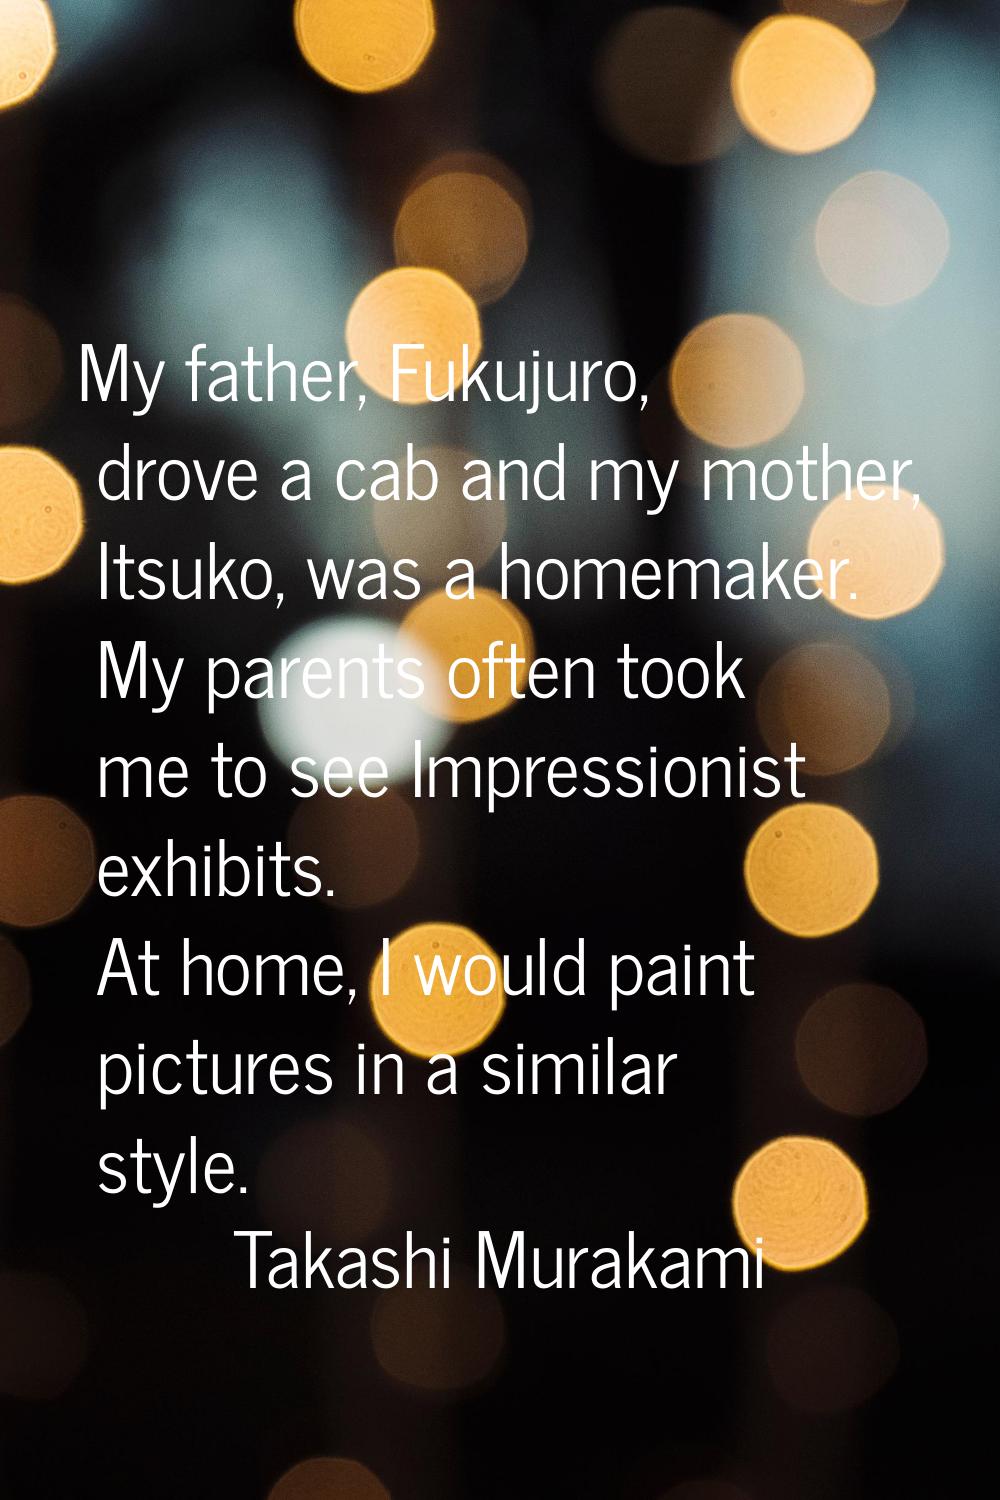 My father, Fukujuro, drove a cab and my mother, Itsuko, was a homemaker. My parents often took me t